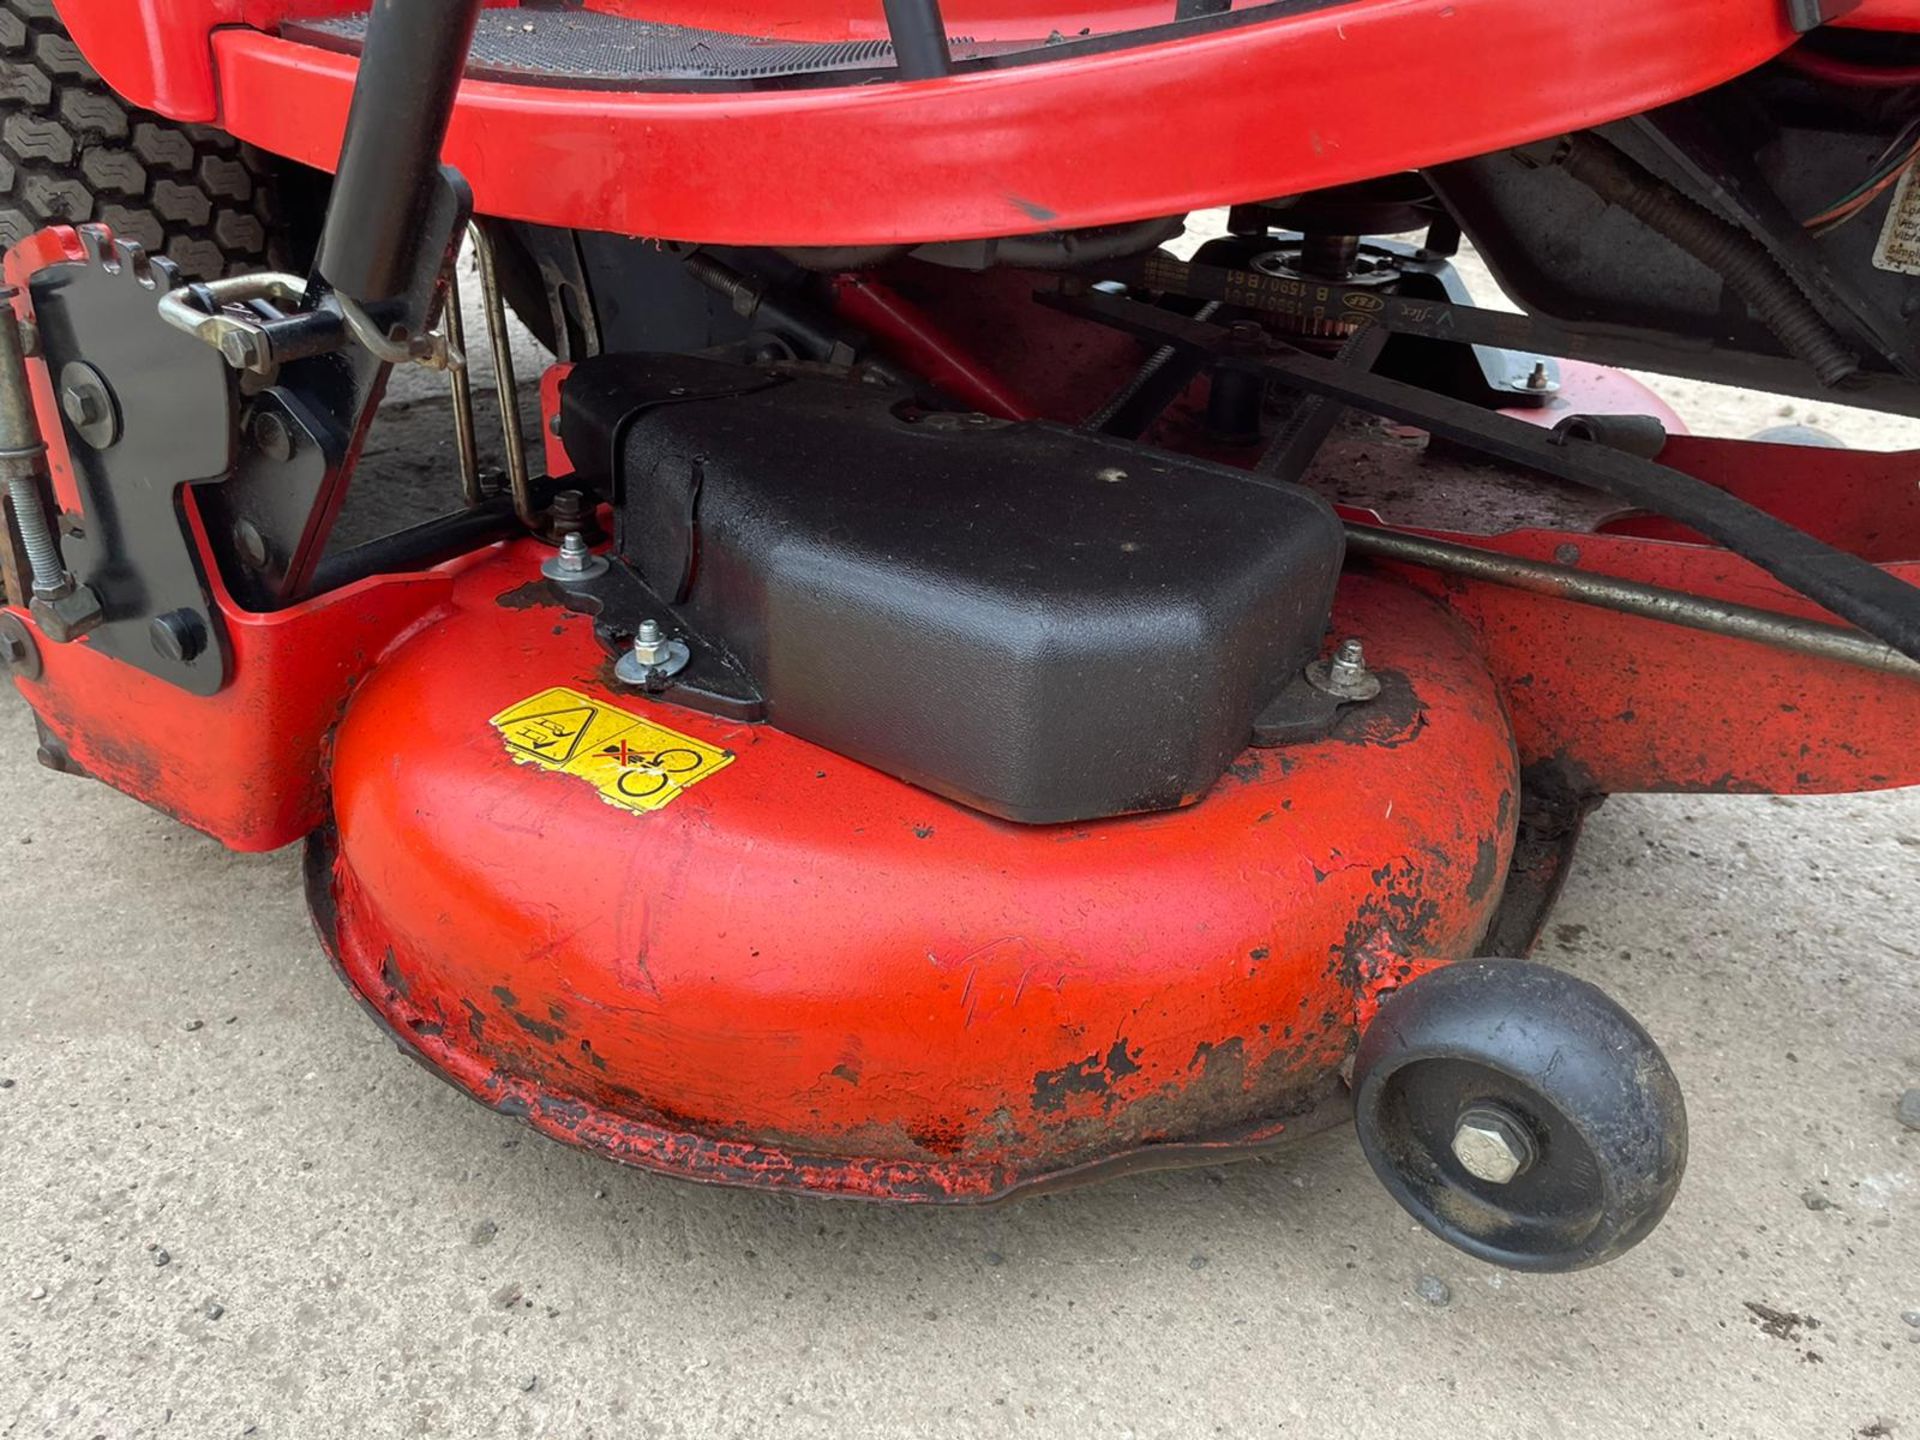 SIMPLICITY BARON 20hp RIDE ON MOWER WITH REAR COLLECTOR, RUNS DRIVES AND CUTS, NEW BATTERY *NO VAT* - Image 11 of 11